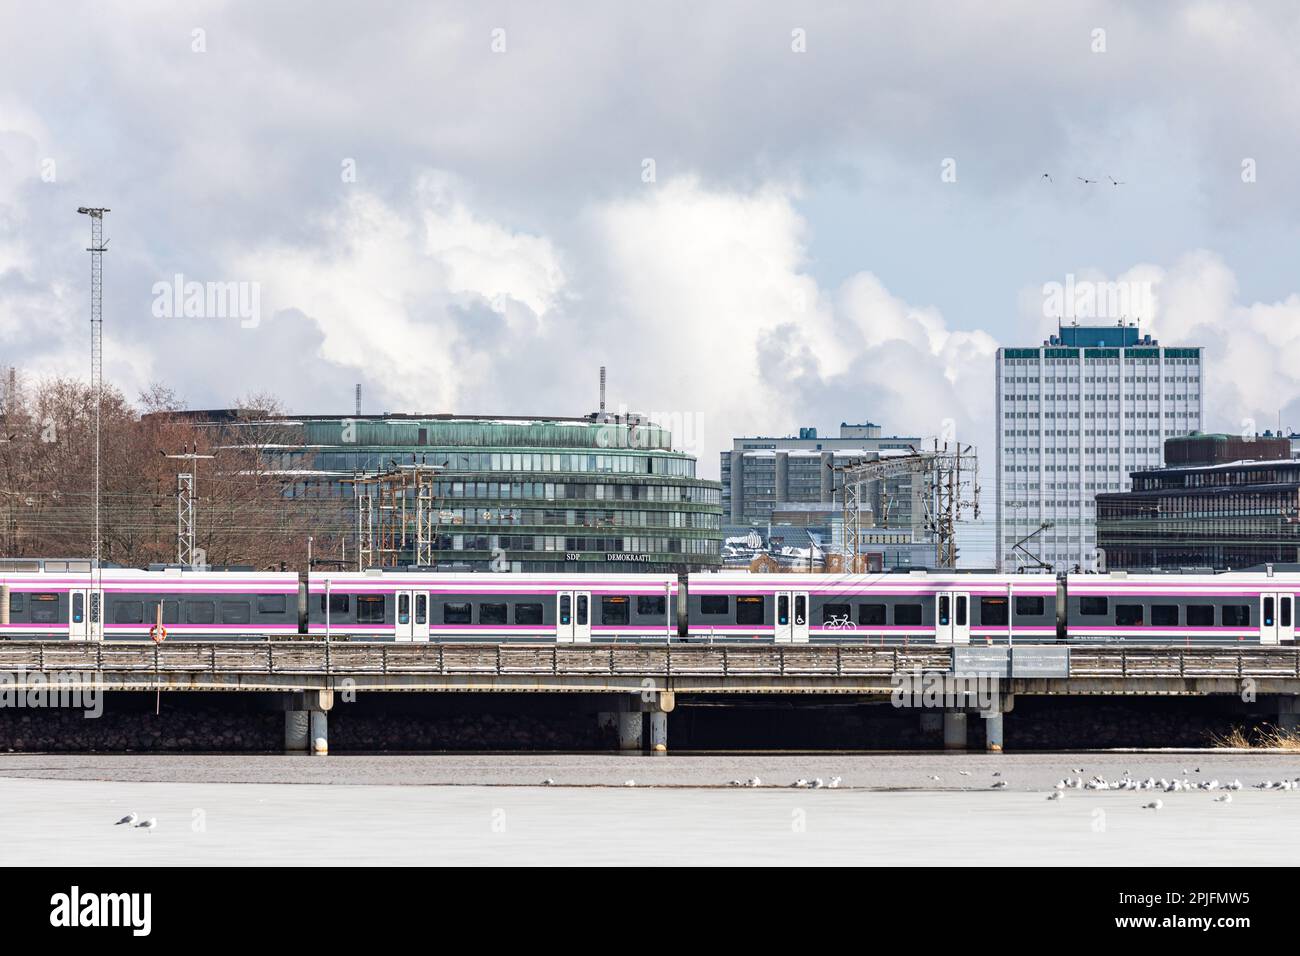 Commuter train passing a railway bridge with Hakaniemi and Merihaka buildings in the background on a cloudy early spring day in Helsinki, Finland Stock Photo